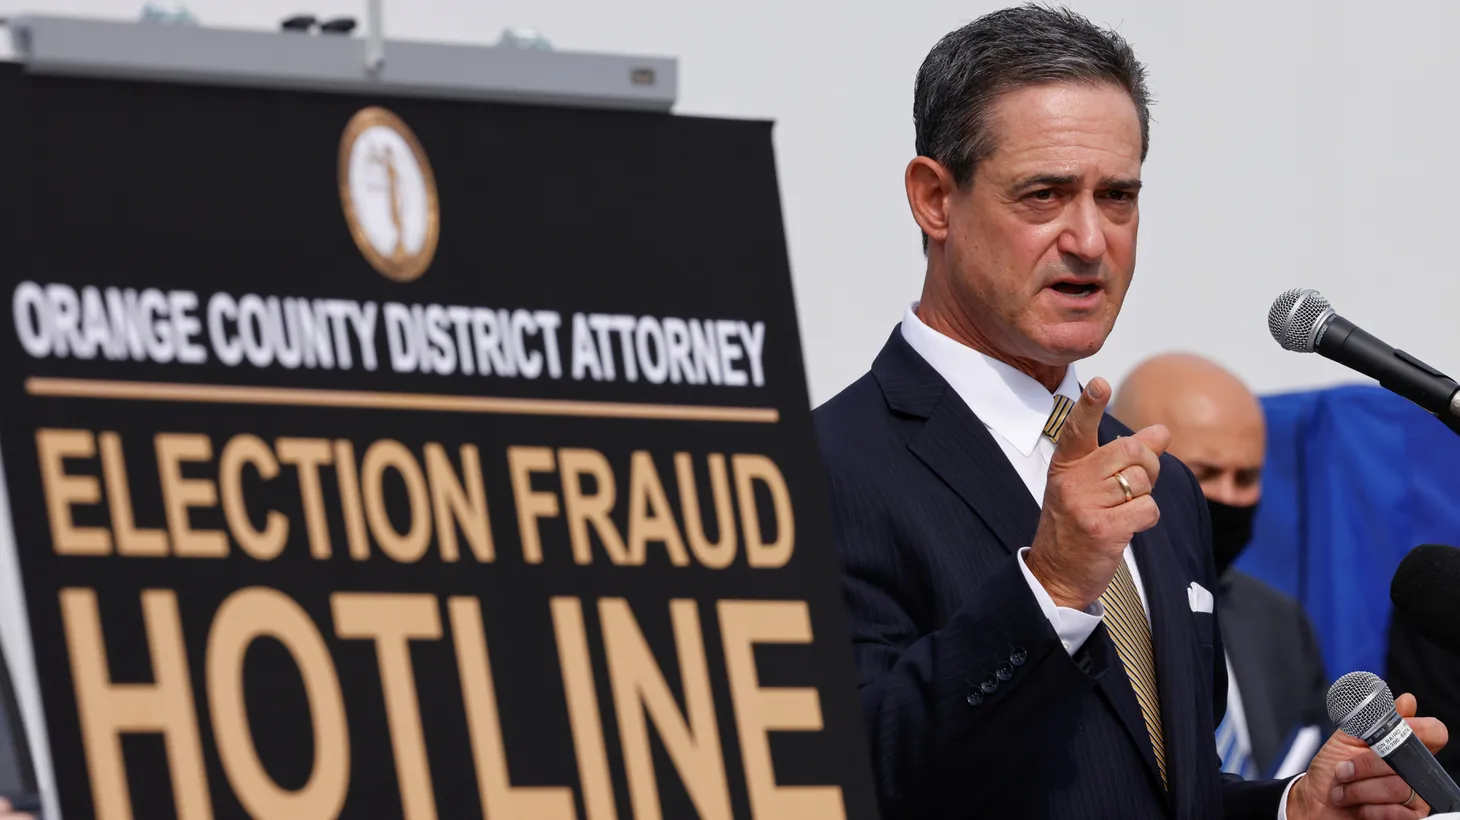 Orange County District Attorney Todd Spitzer speaks on election fraud at the Orange County Registrar of Voters on Santa Ana, California, U.S., October, 5, 2020. Spitzer is now running for reelection, facing challenger Pete Hardin.